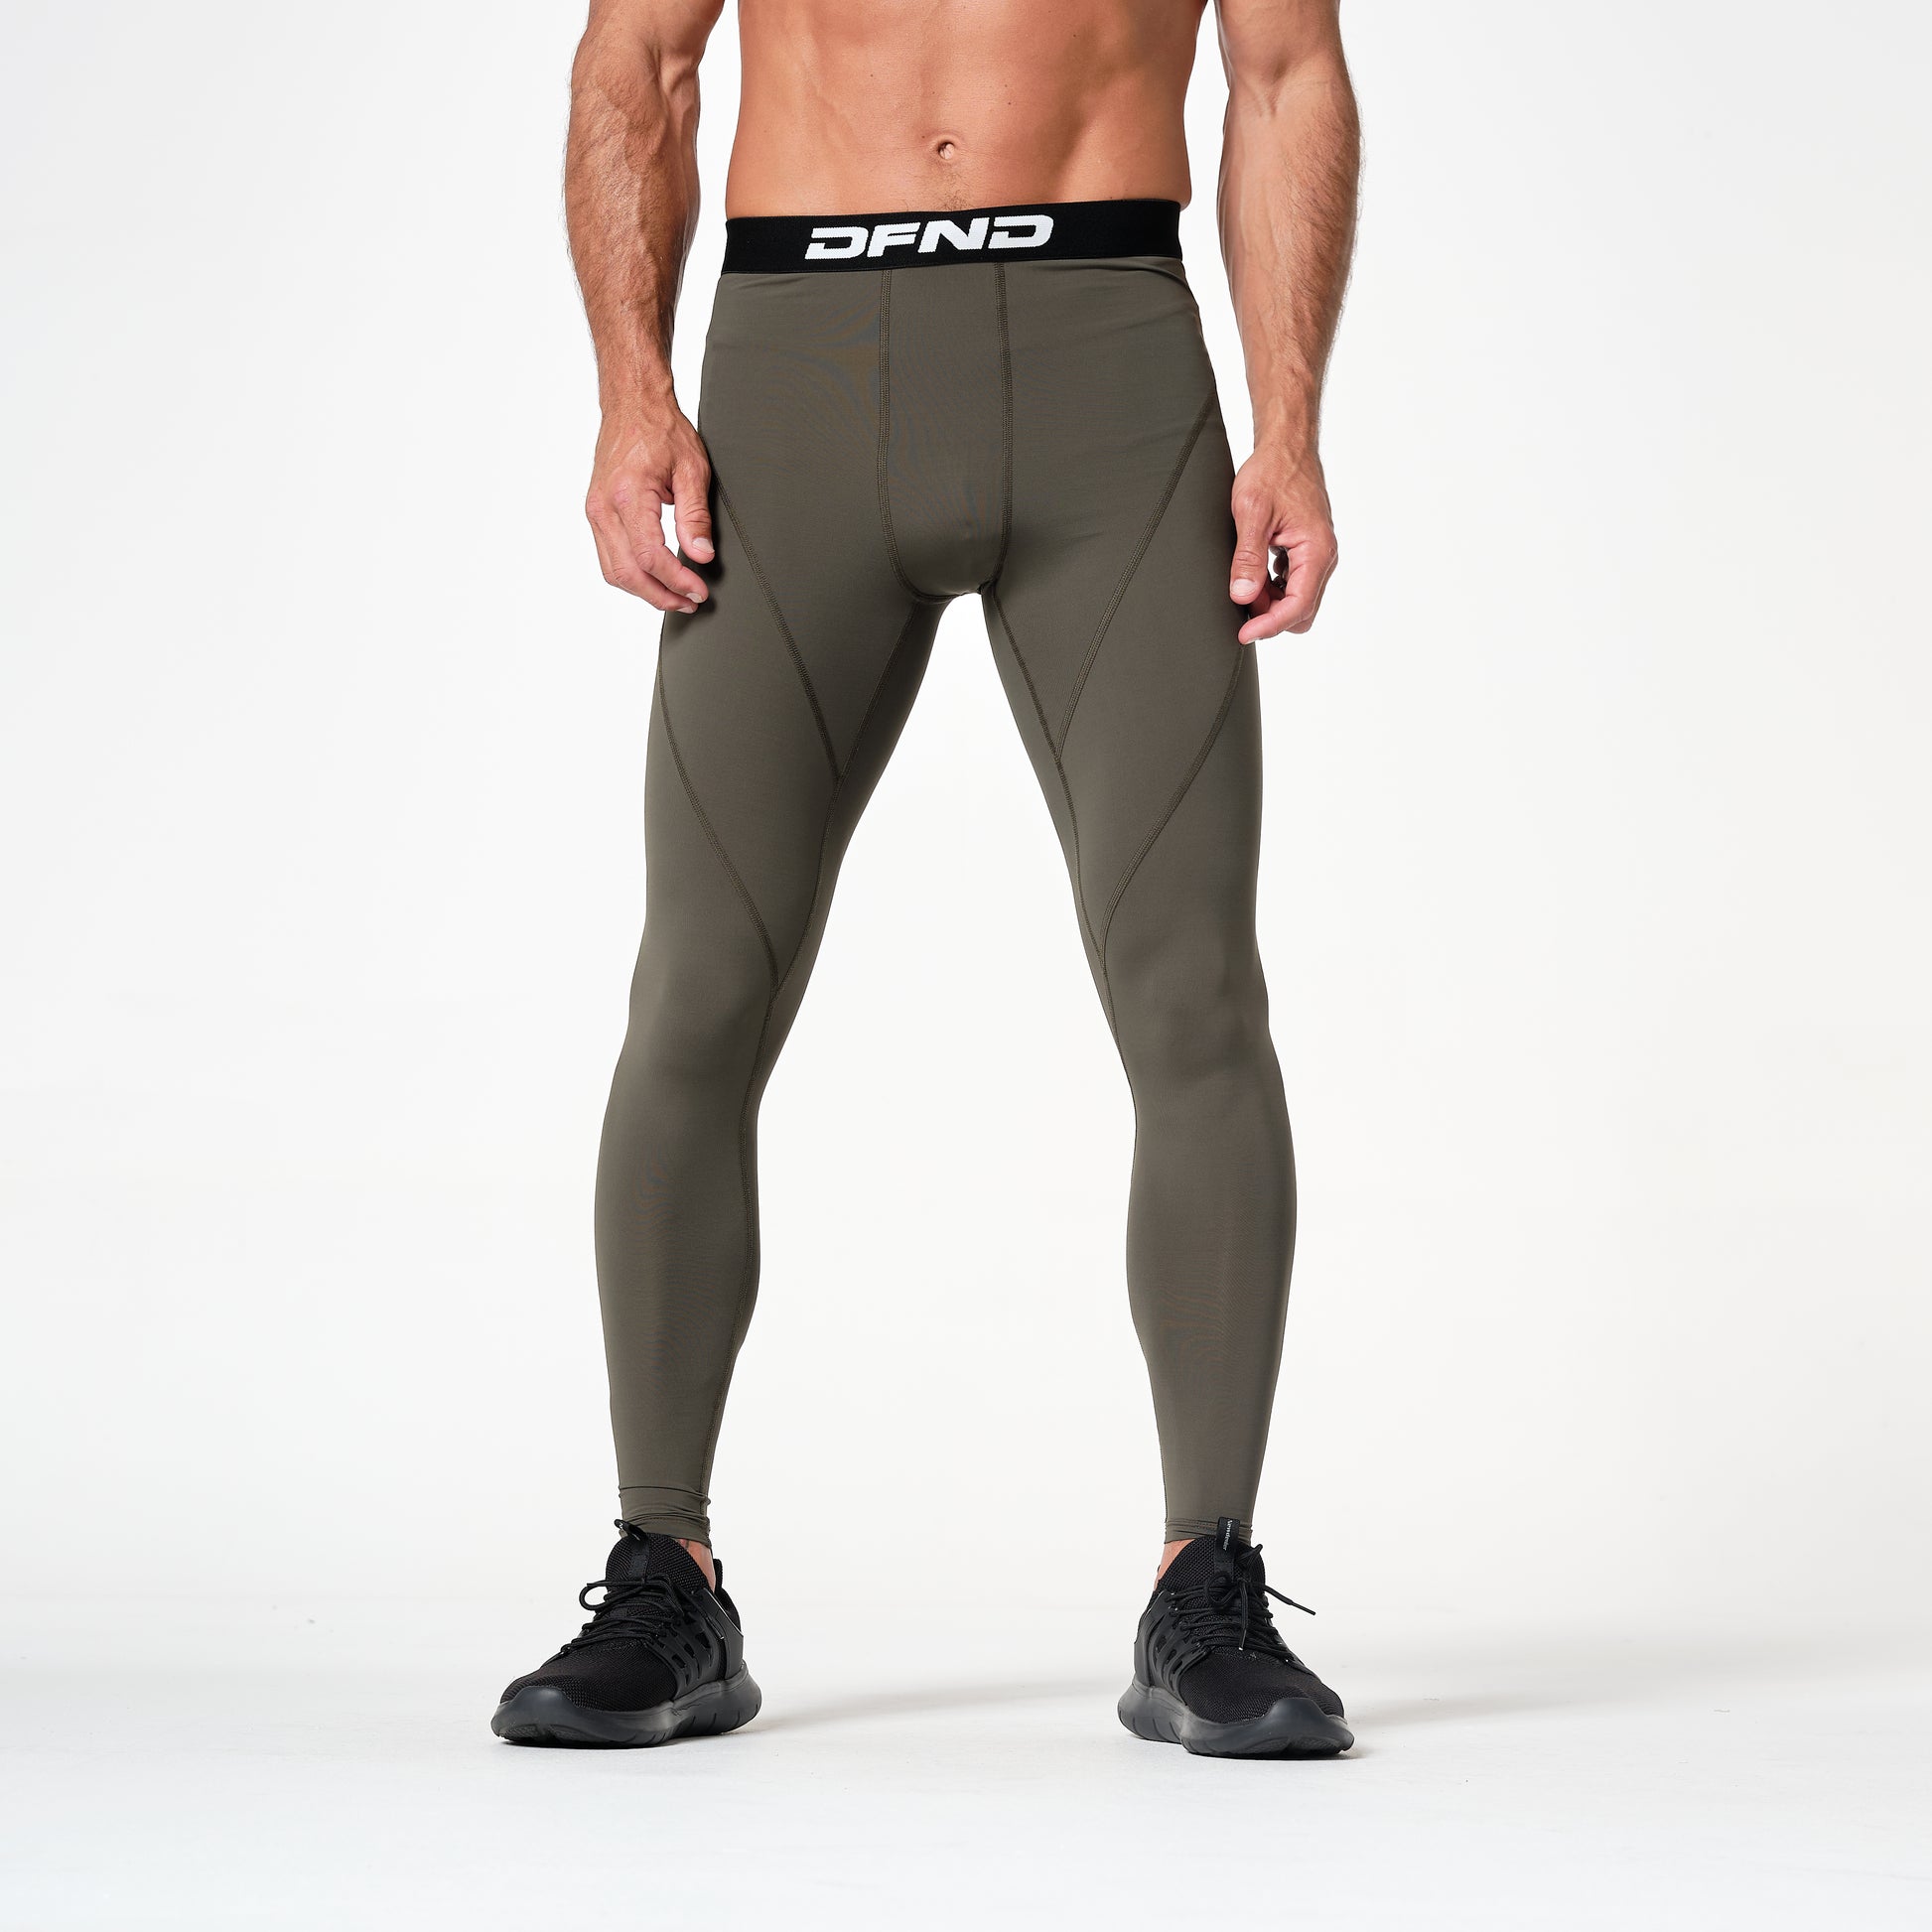 Do sports compression tights help you recover after a workout?